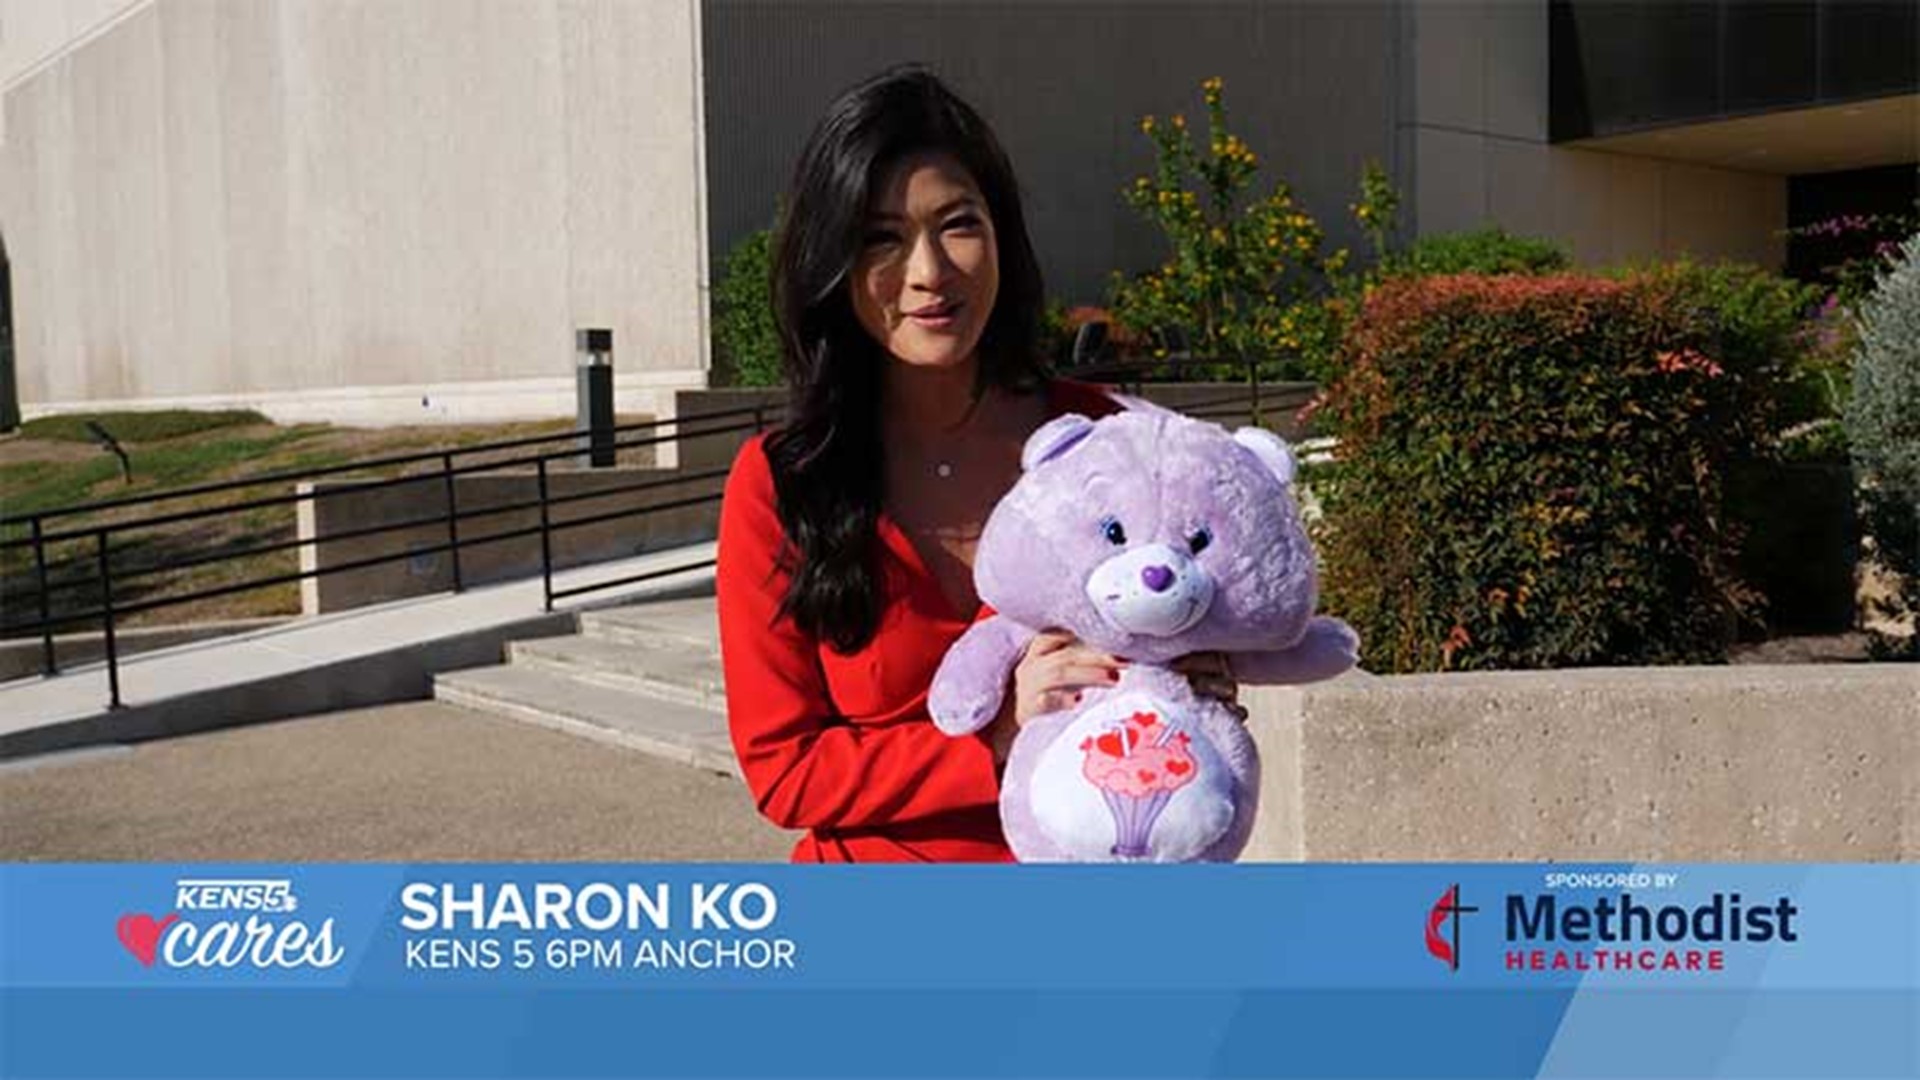 KENS 5's Sharon Ko says one of her favorite toys growing up was a Care Bear! You can help create lasting memories for children in need this holiday season.